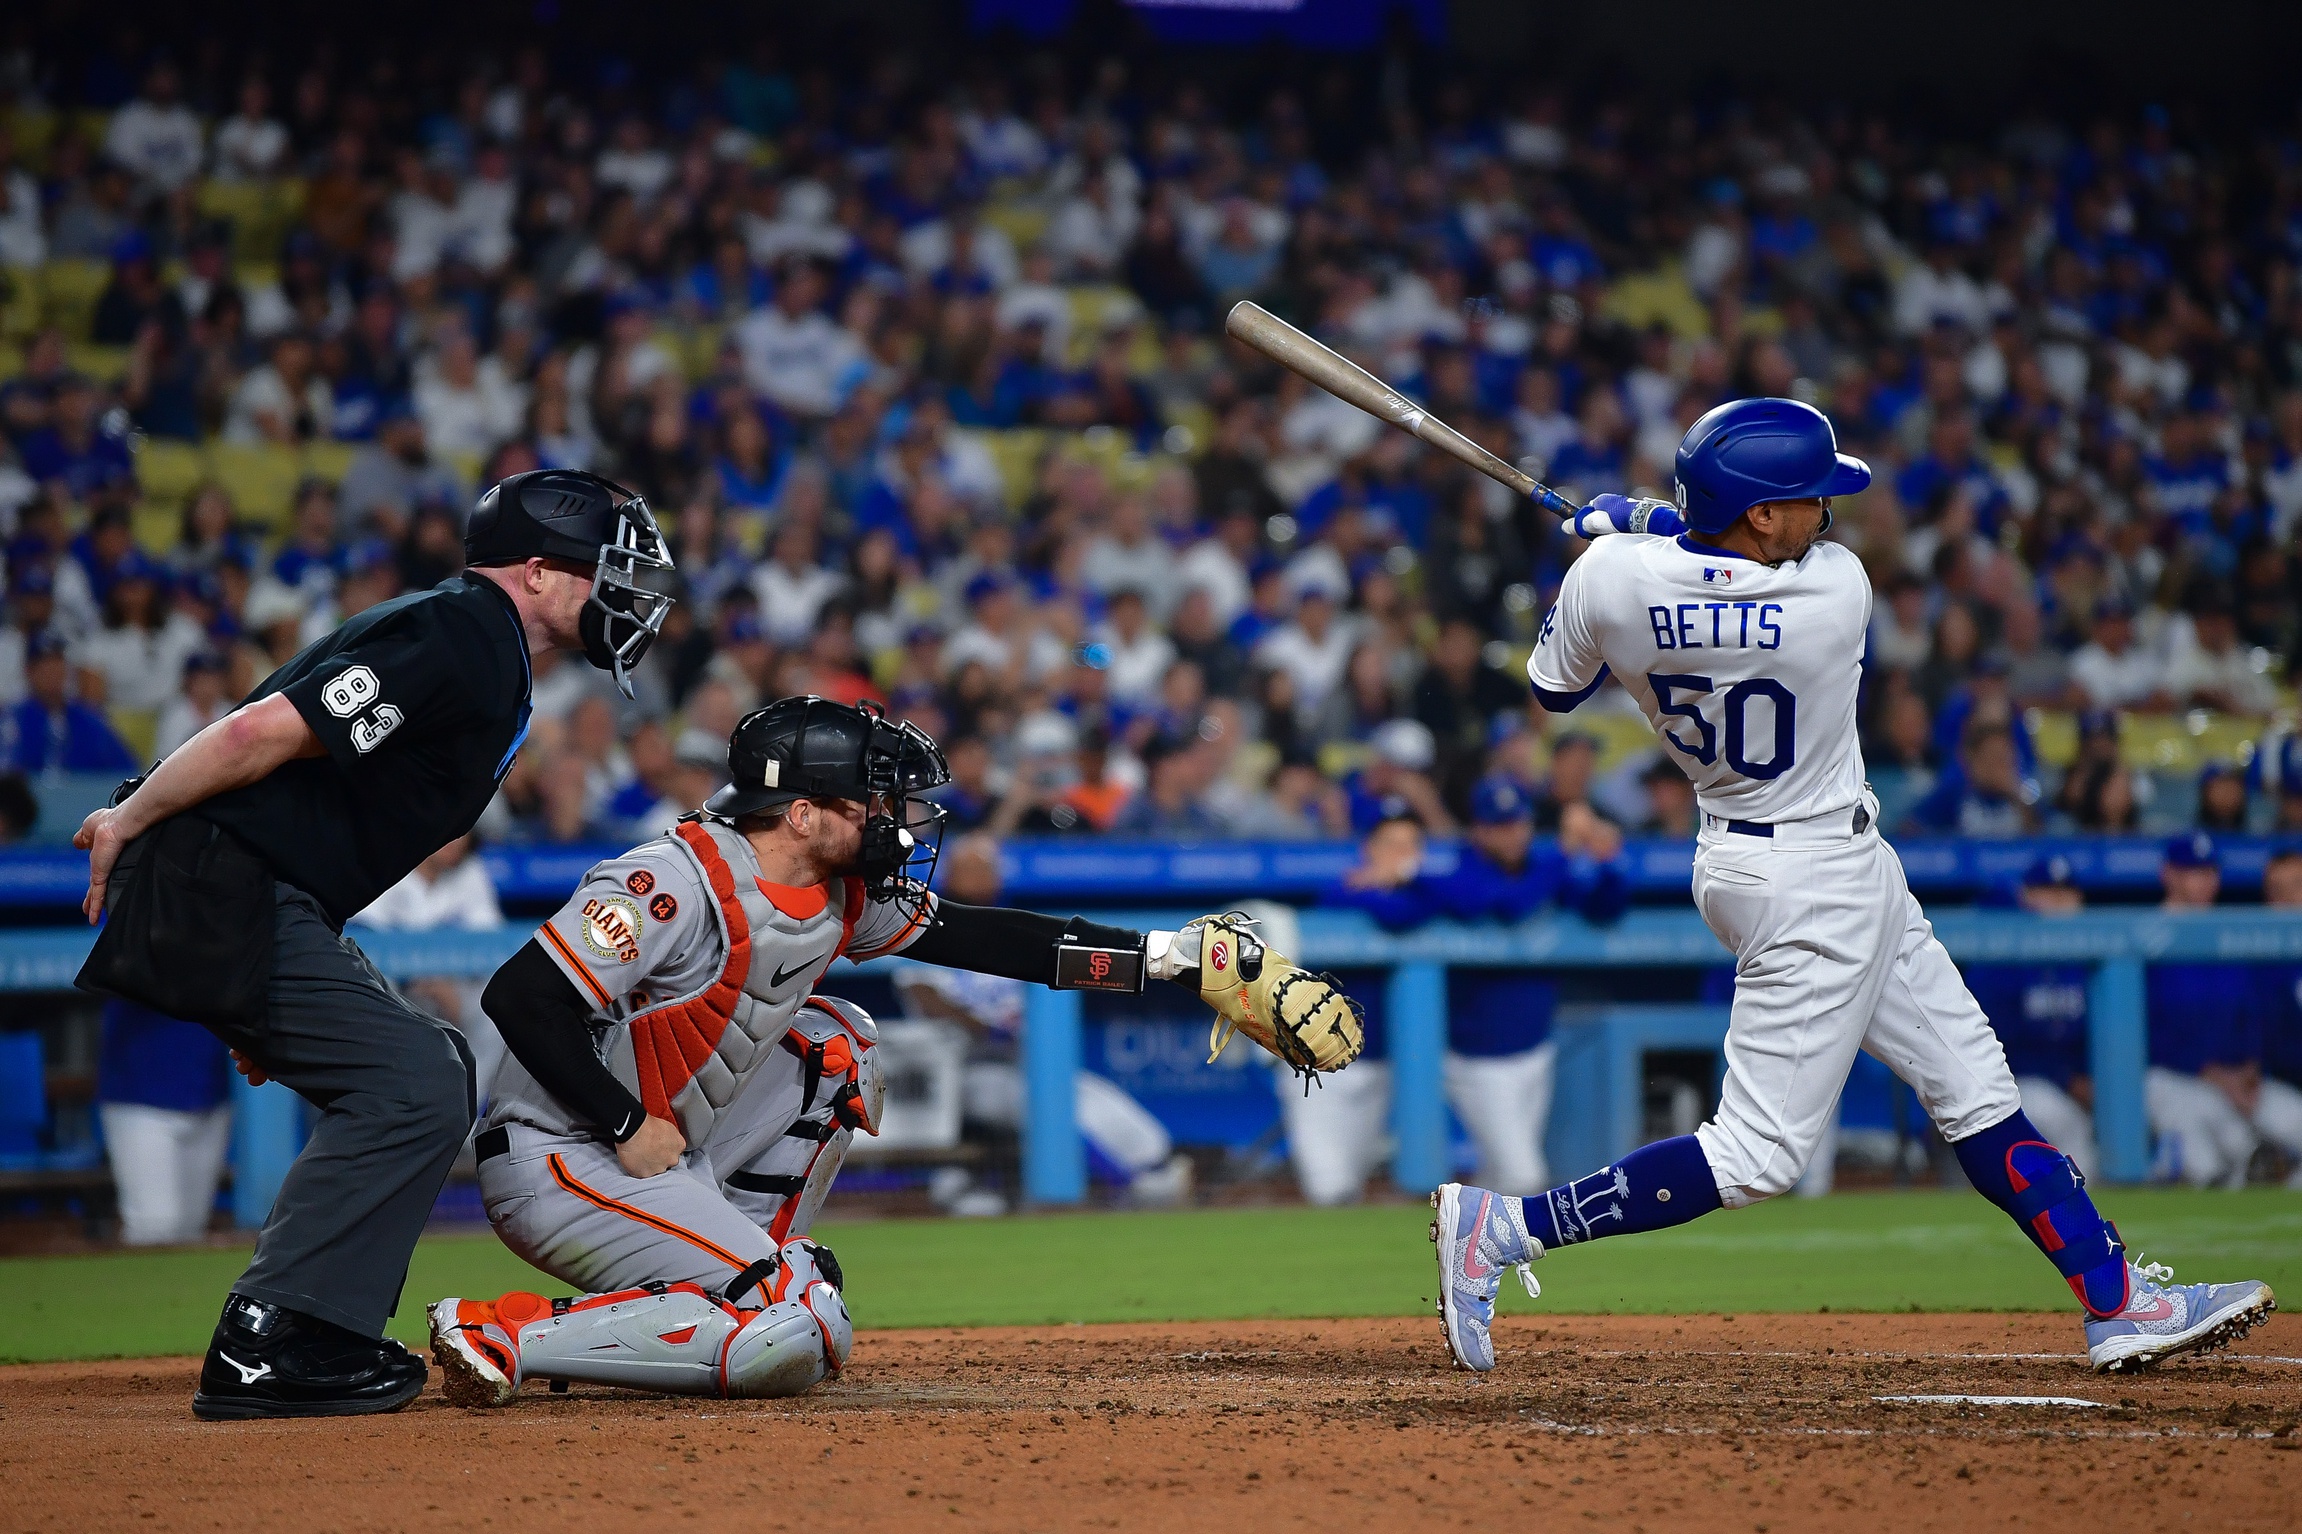 Los Angeles Dodgers: Who is going to set the home run record?